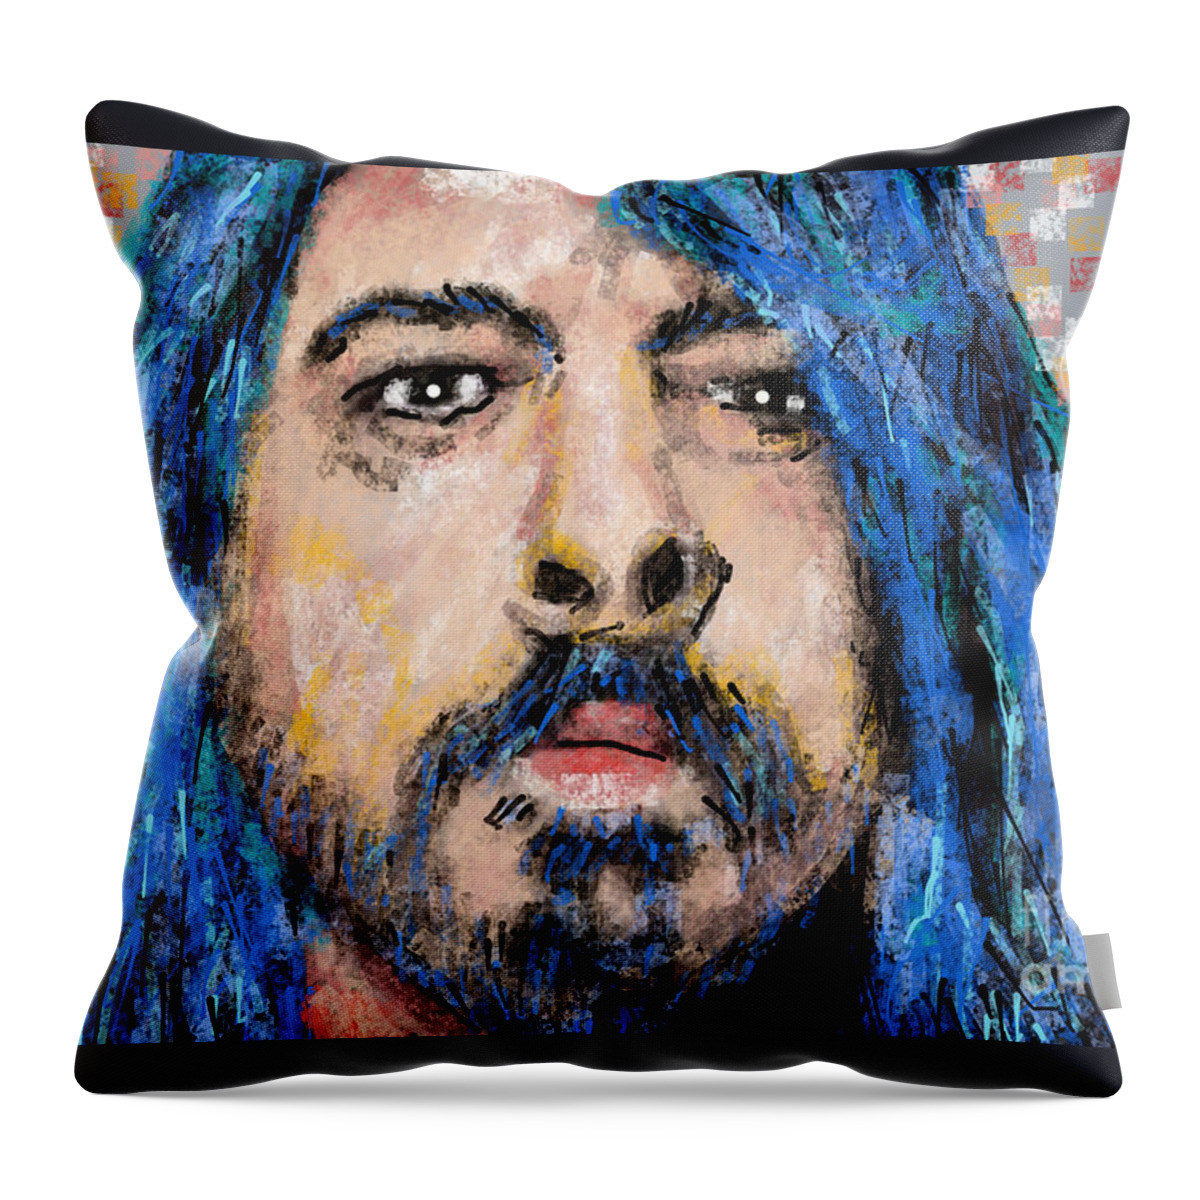 Dave Grohl Foo Fighters Music Concert Celebrity Rockstar Star Rock And Roll Digital Musician Icon Throw Pillow featuring the painting Dave Grohl The Foo Fighters by Bradley Boug